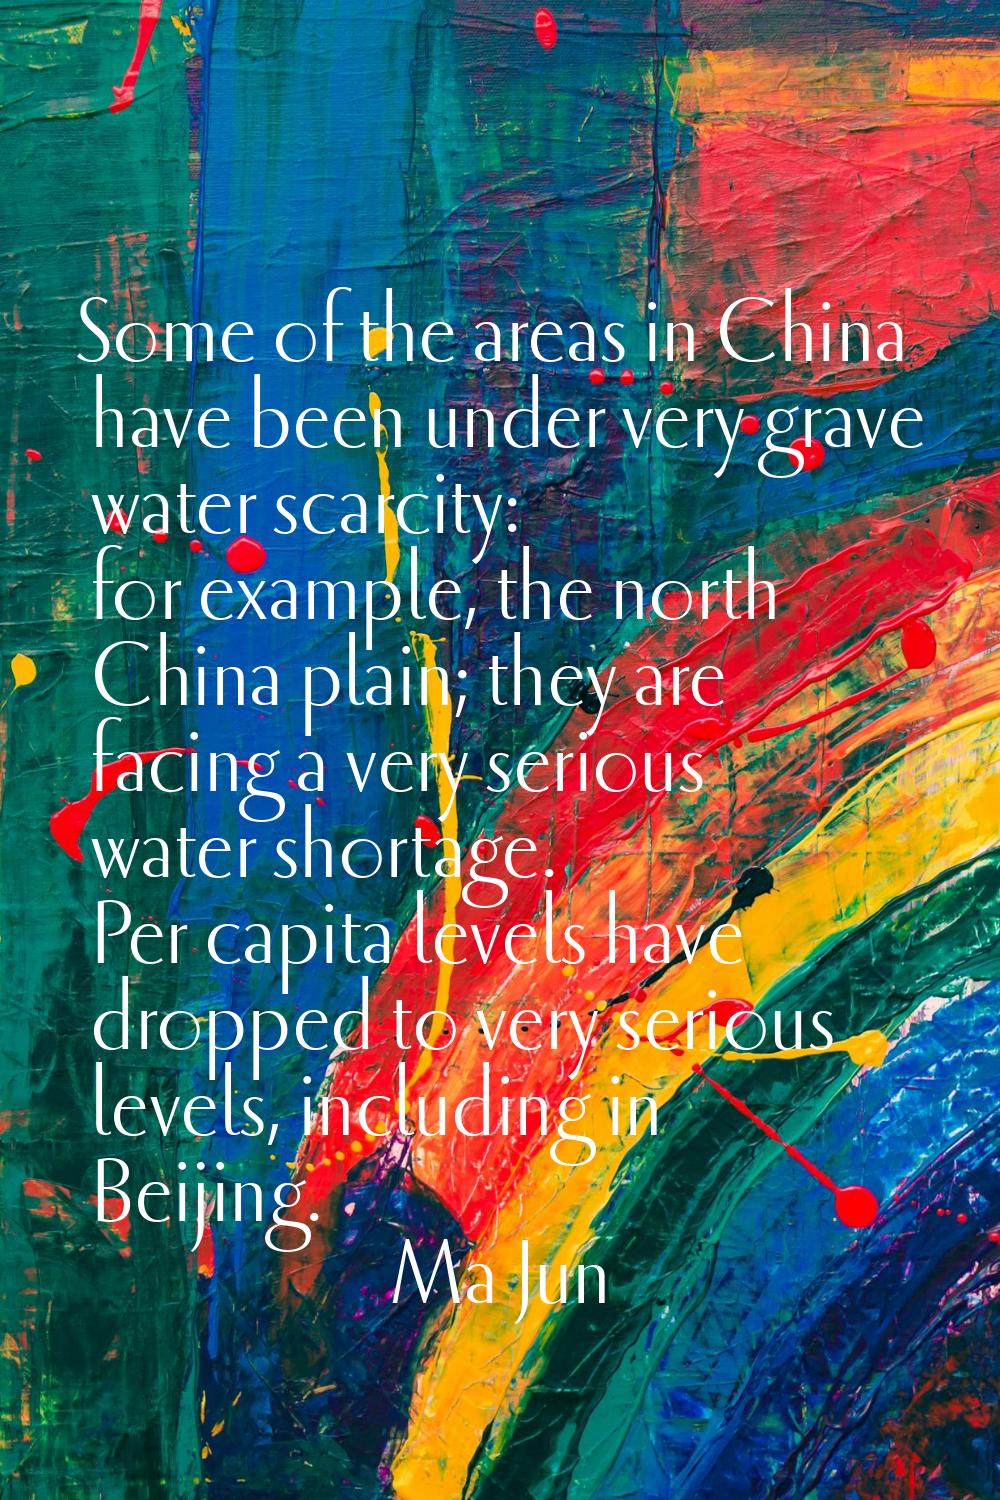 Some of the areas in China have been under very grave water scarcity: for example, the north China 